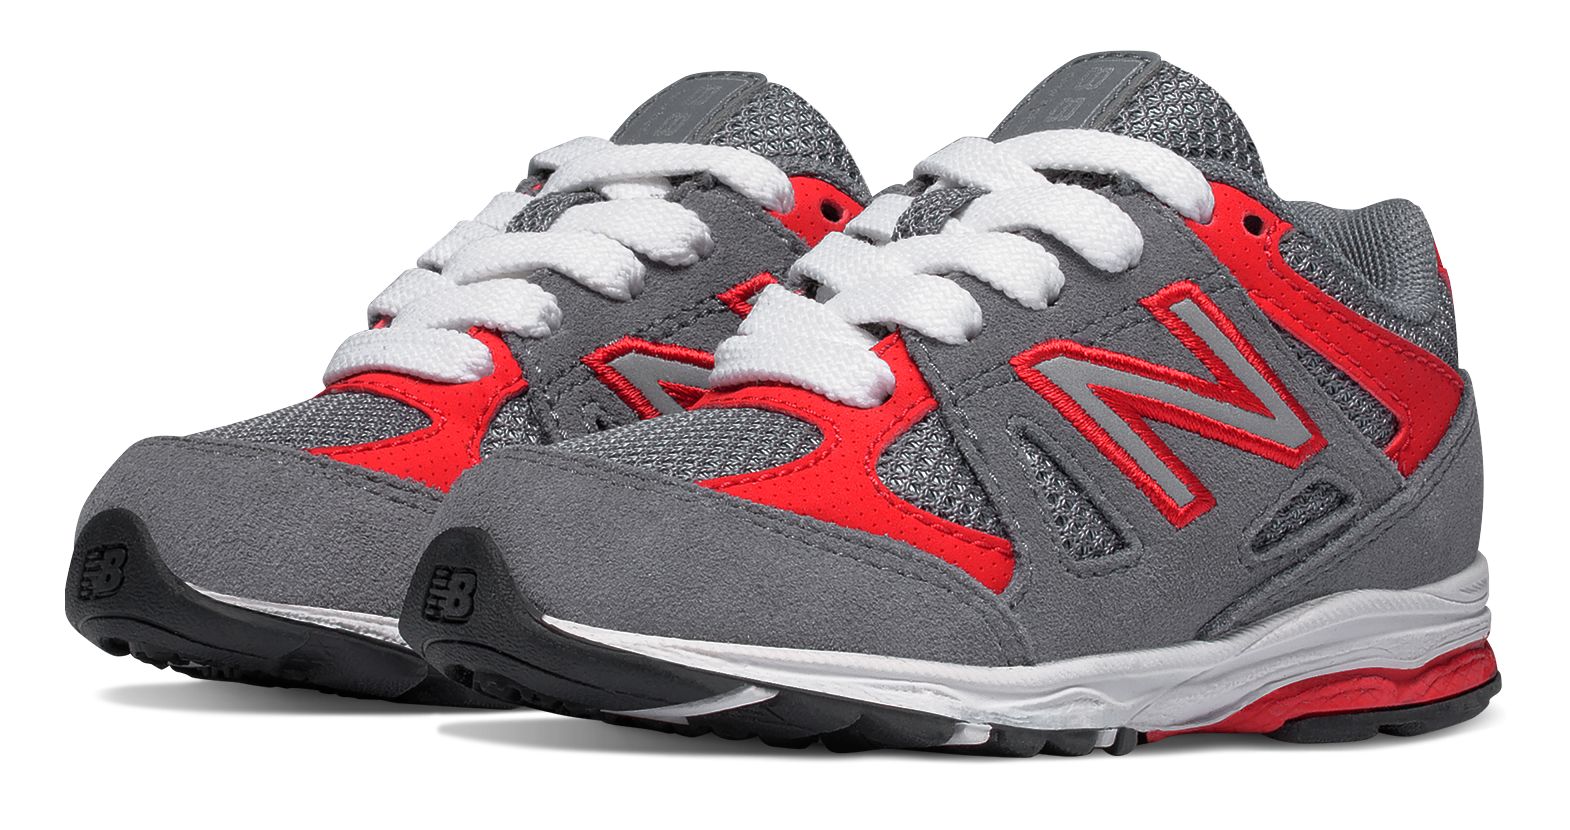 New Balance WT61509 on Sale - Discounts Up to 63% Off on WT61509SAH at Joe\u0027s  New Balance Outlet